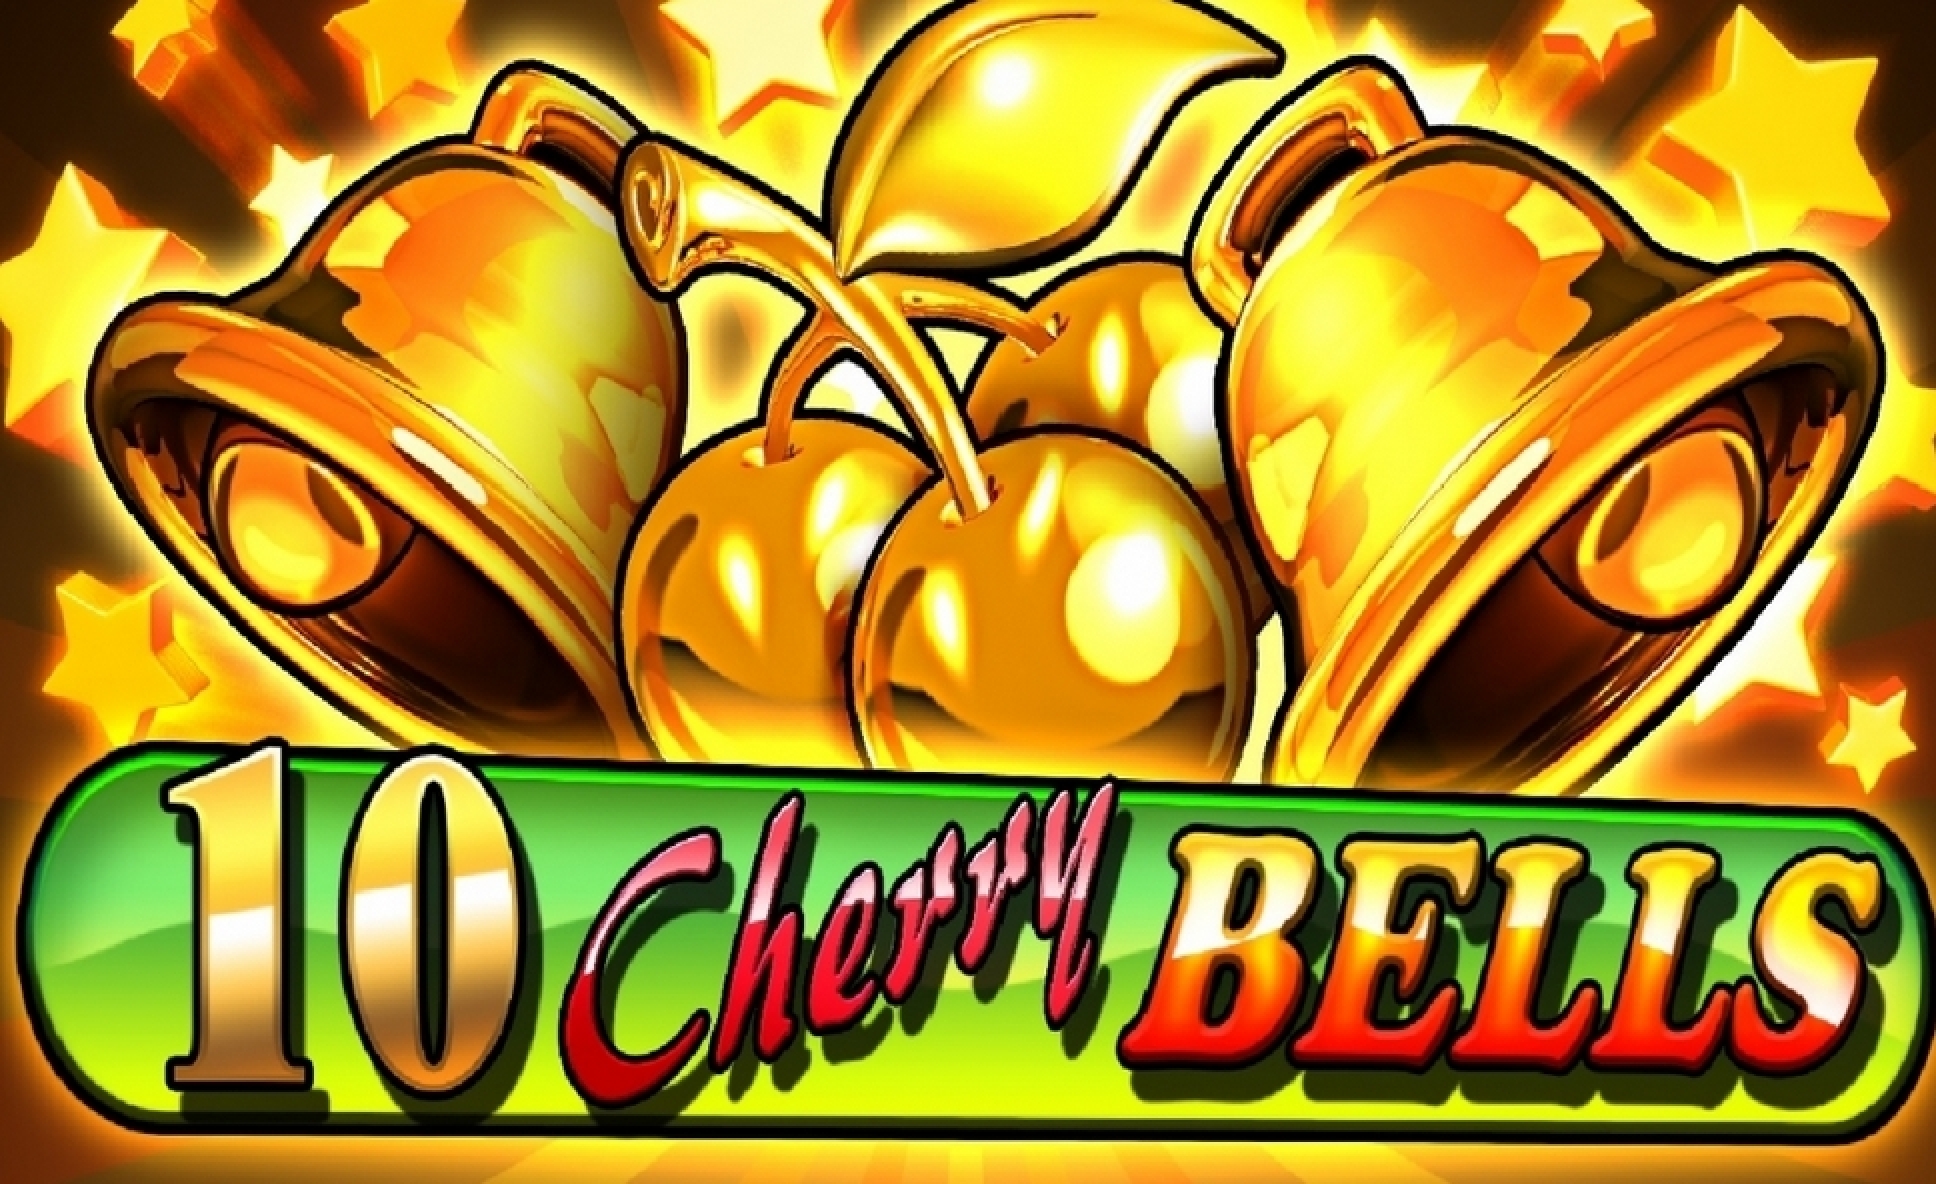 The 10 Cherry Bells Online Slot Demo Game by FUGA Gaming